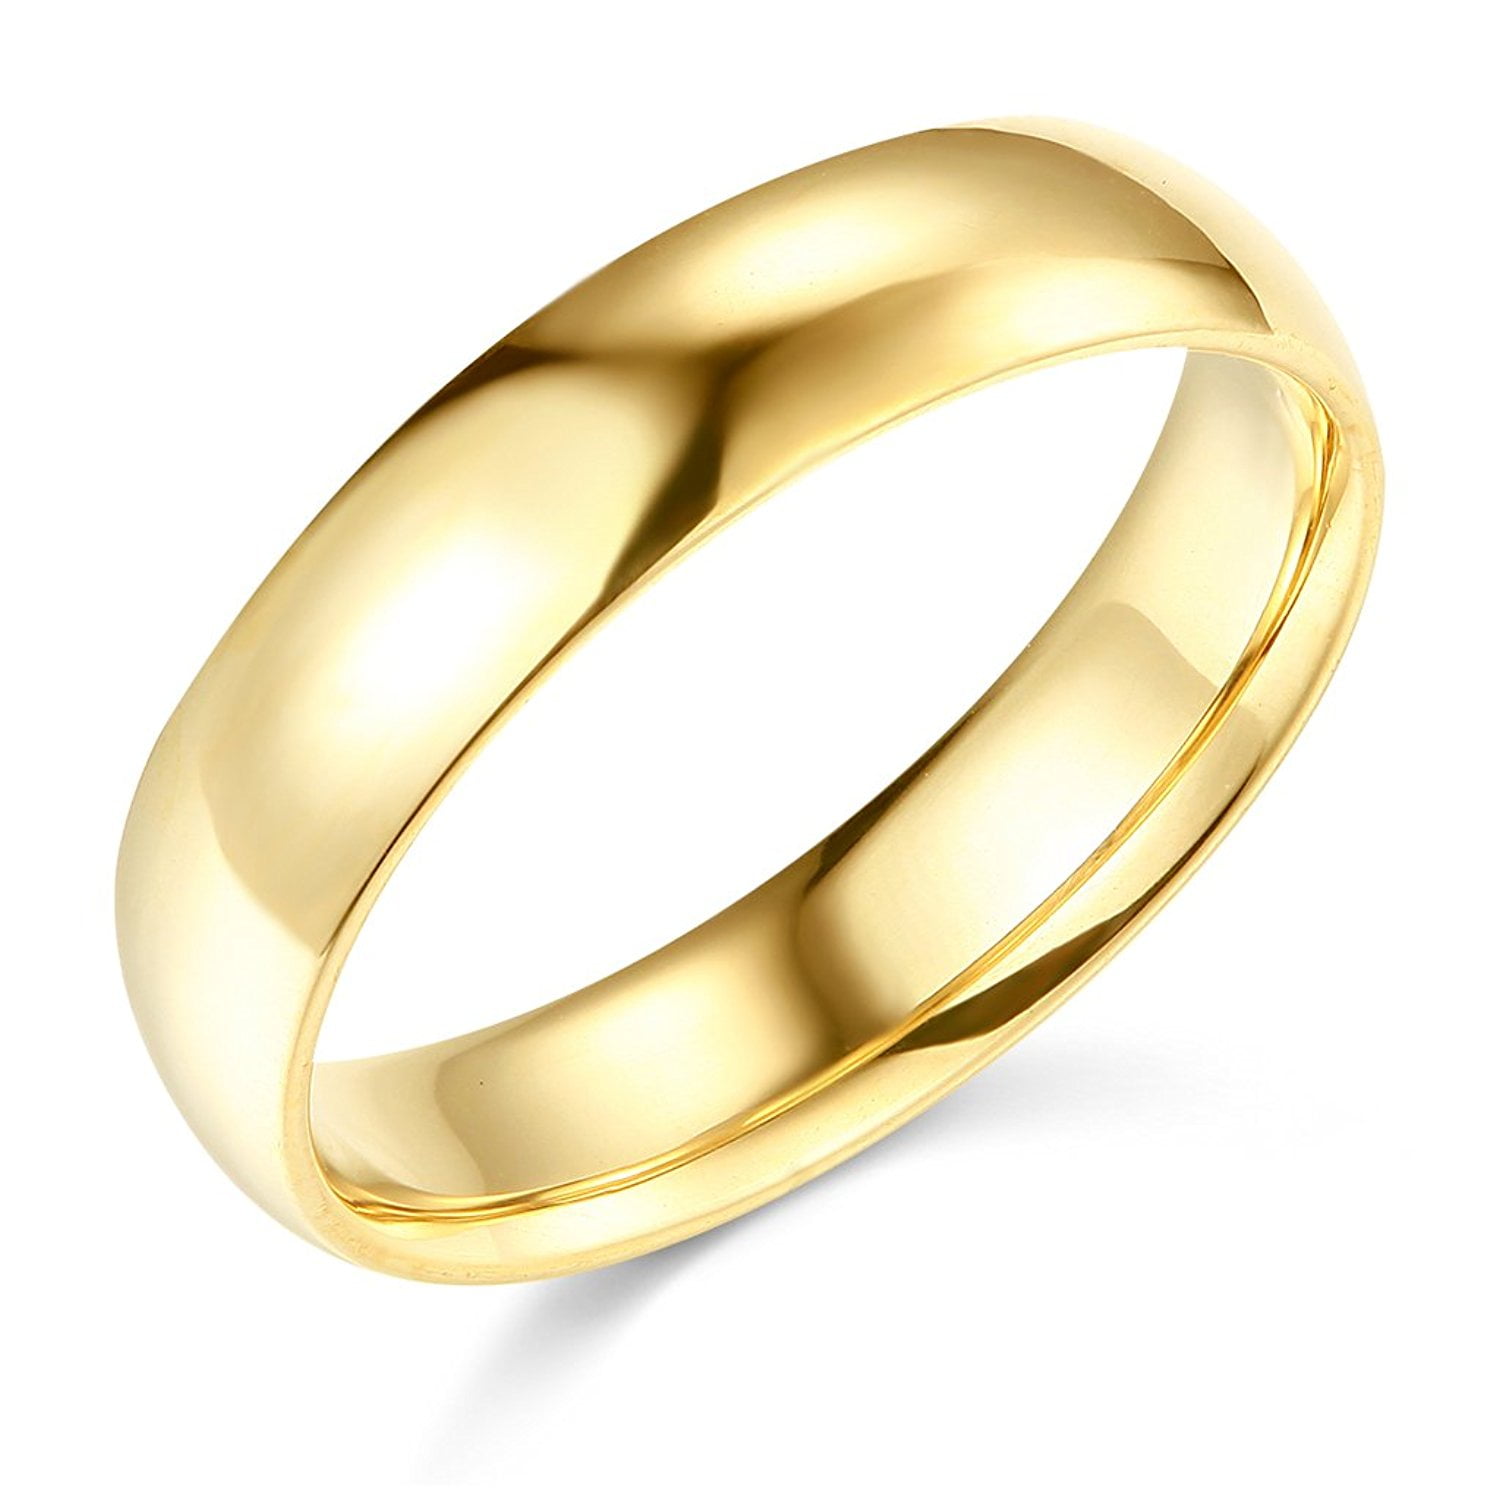 4 mm Solid 14k Yellow Gold Band Plain Wedding Ring Polished Finish Regular Fit